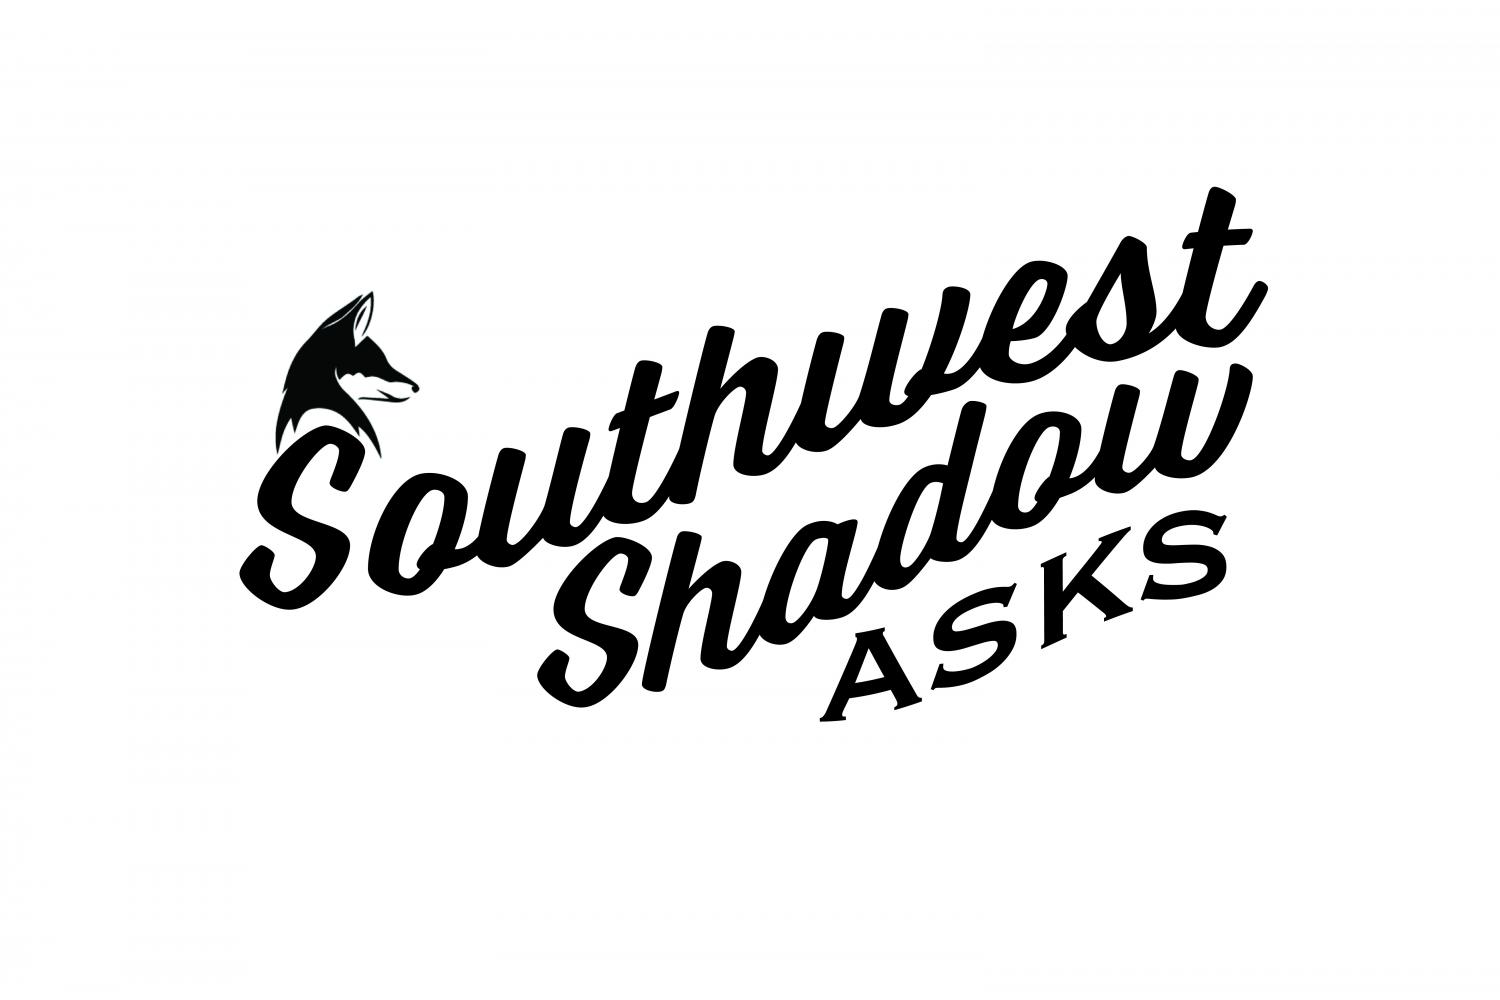 SOUTHWEST SHADOW ASKS: Claire Anne Reyes